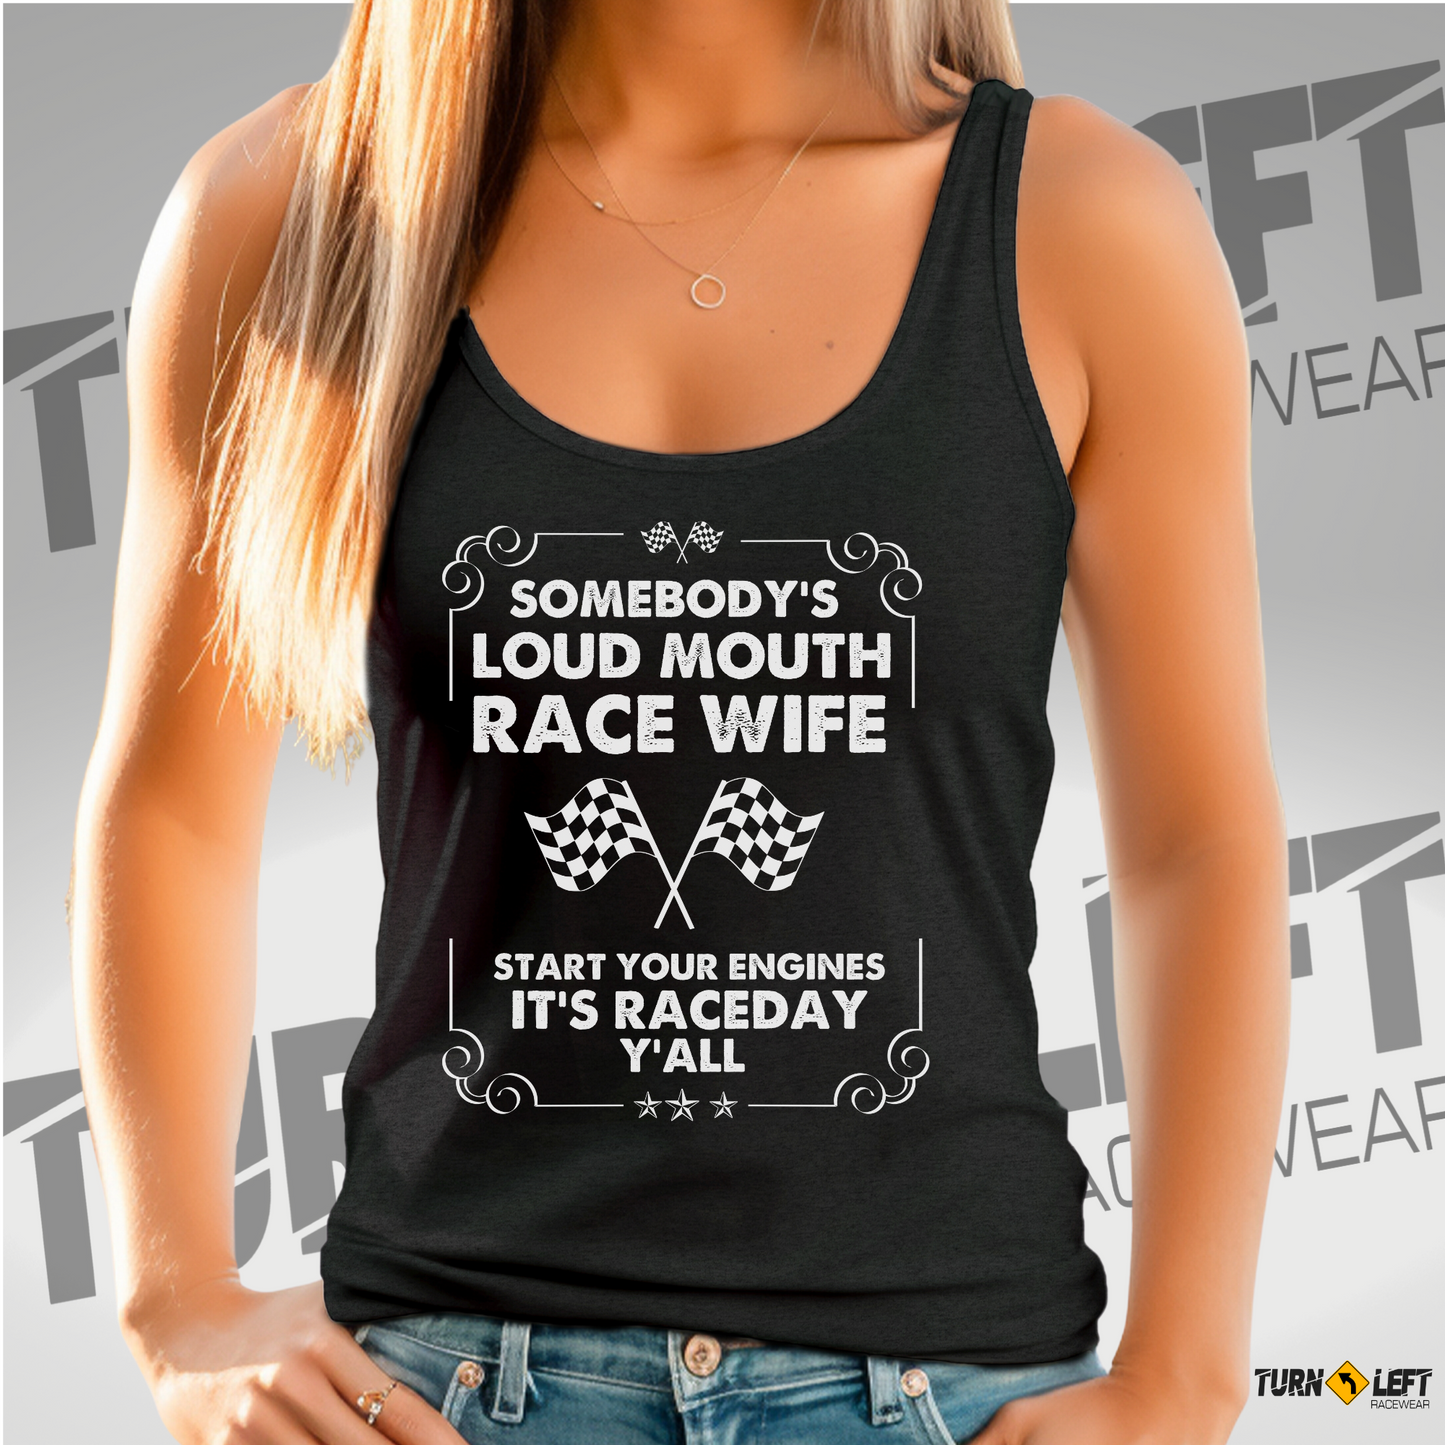 Somebody's Loud Mouth Race Wife Shirts. Dirt Track Racing Wife Tank Tops, Racers Wife Shirts, Race Wife Gifts.